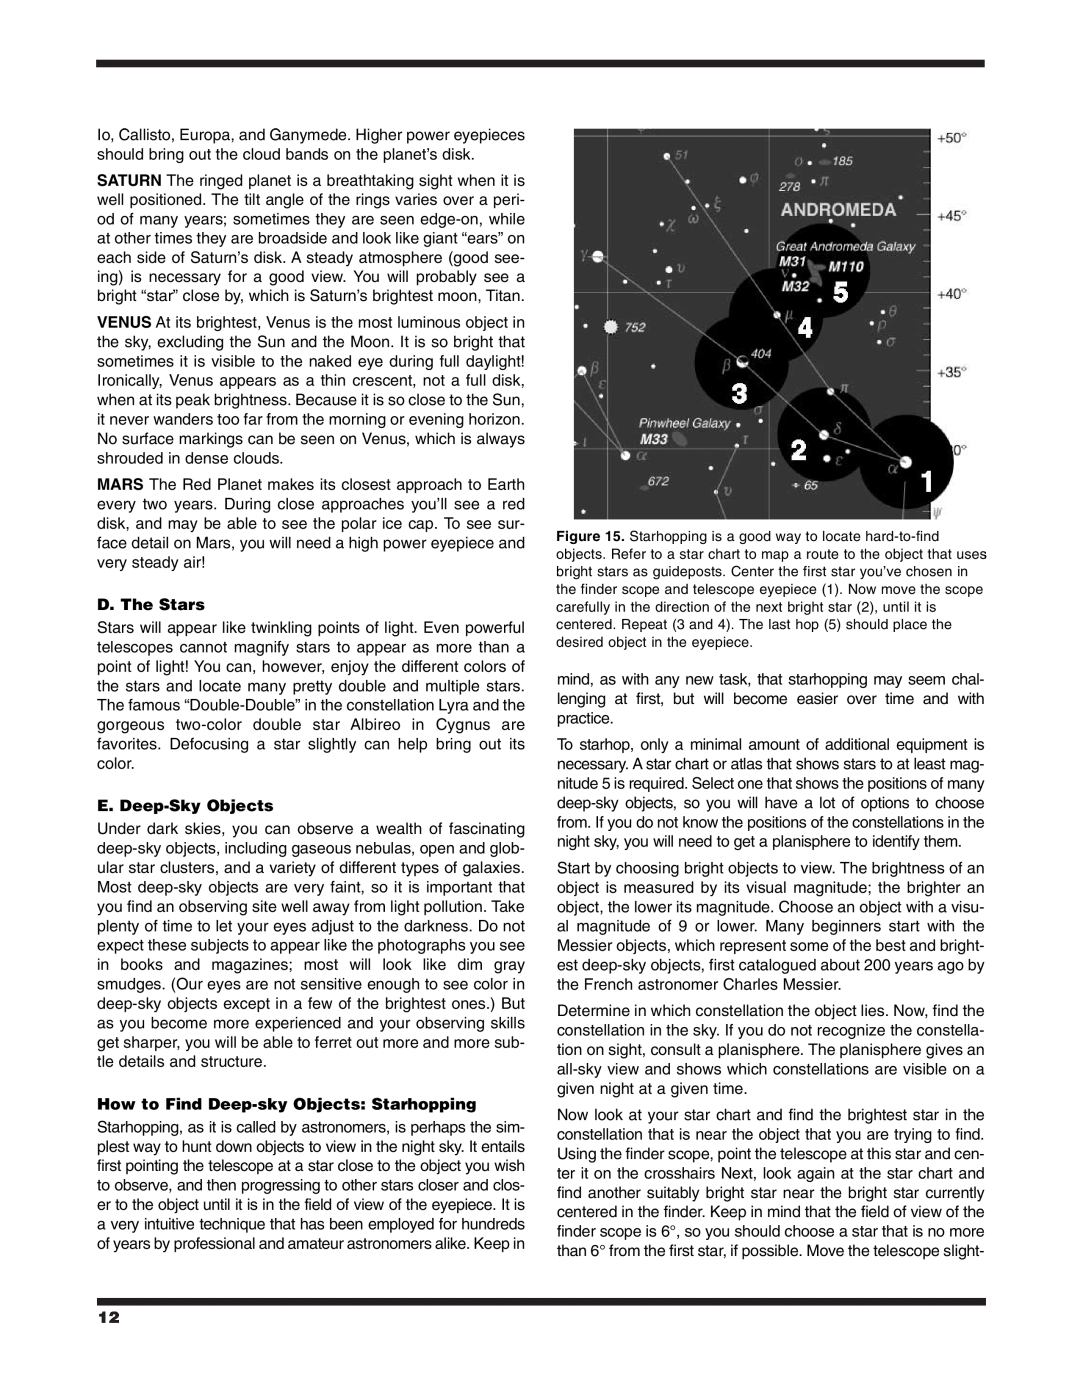 Orion XT4.5 instruction manual D. The Stars, E. Deep-Sky Objects, How to Find Deep-sky Objects Starhopping 